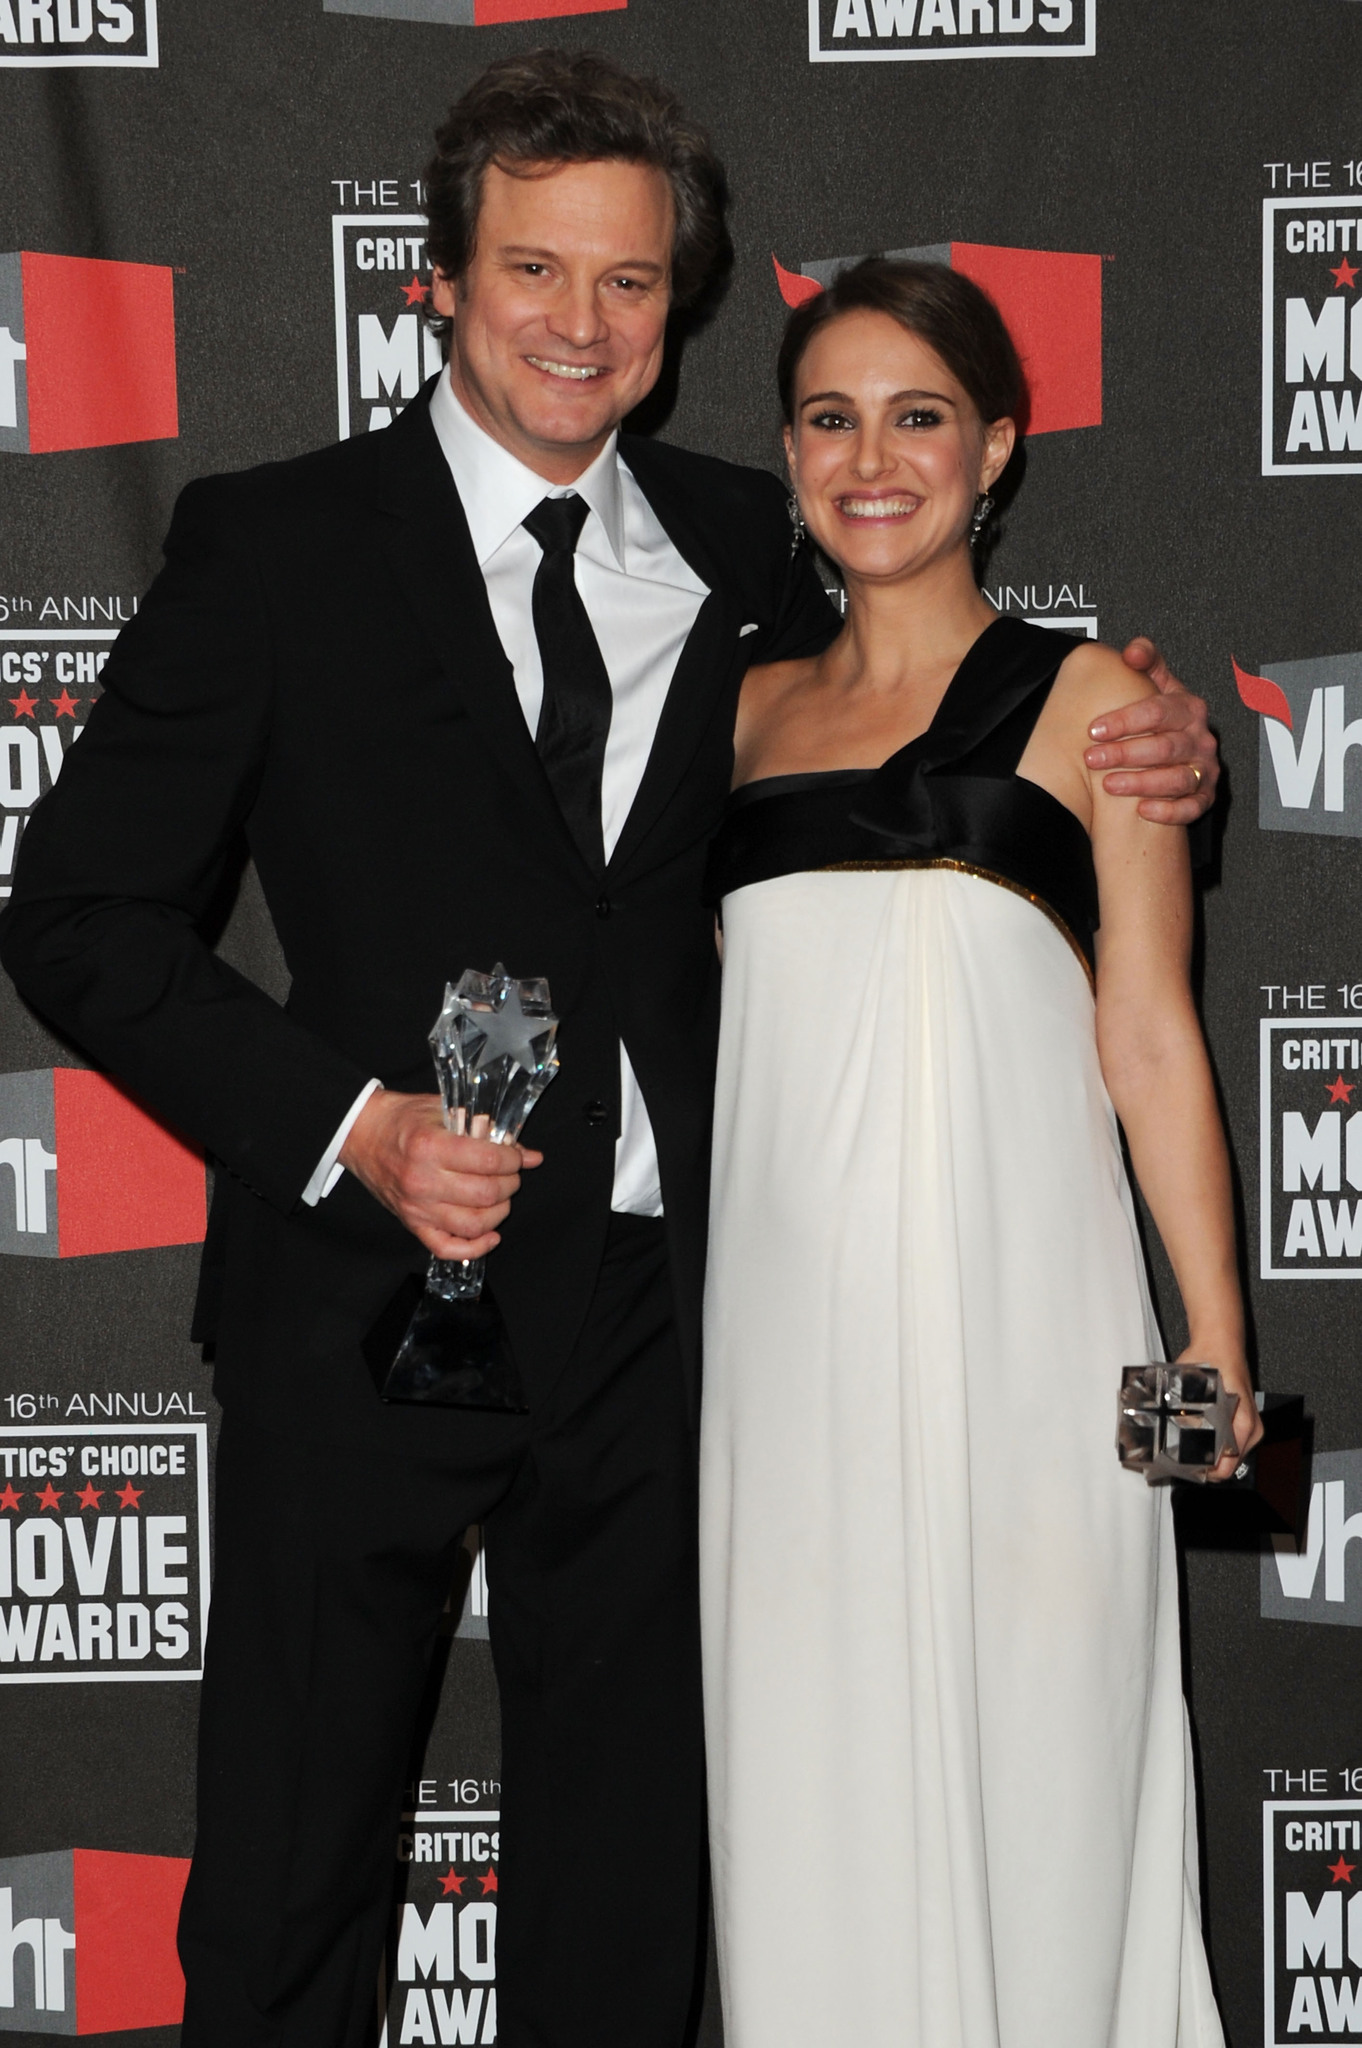 Colin Firth and Natalie Portman